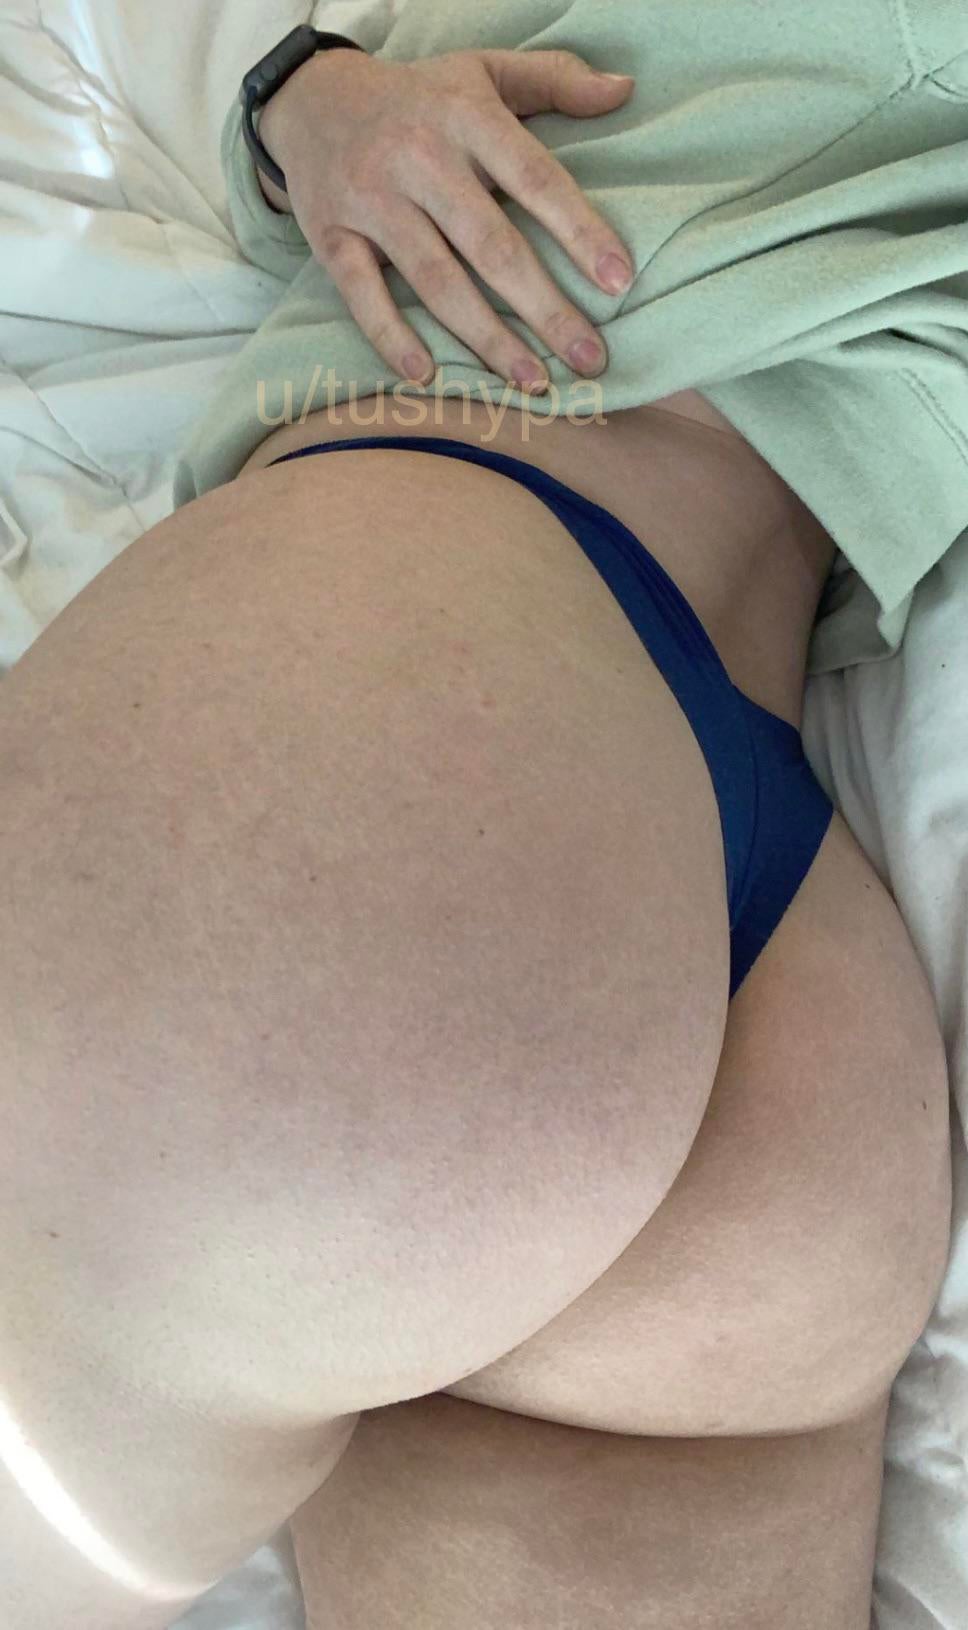 PAWG I would love to sit on someones face right